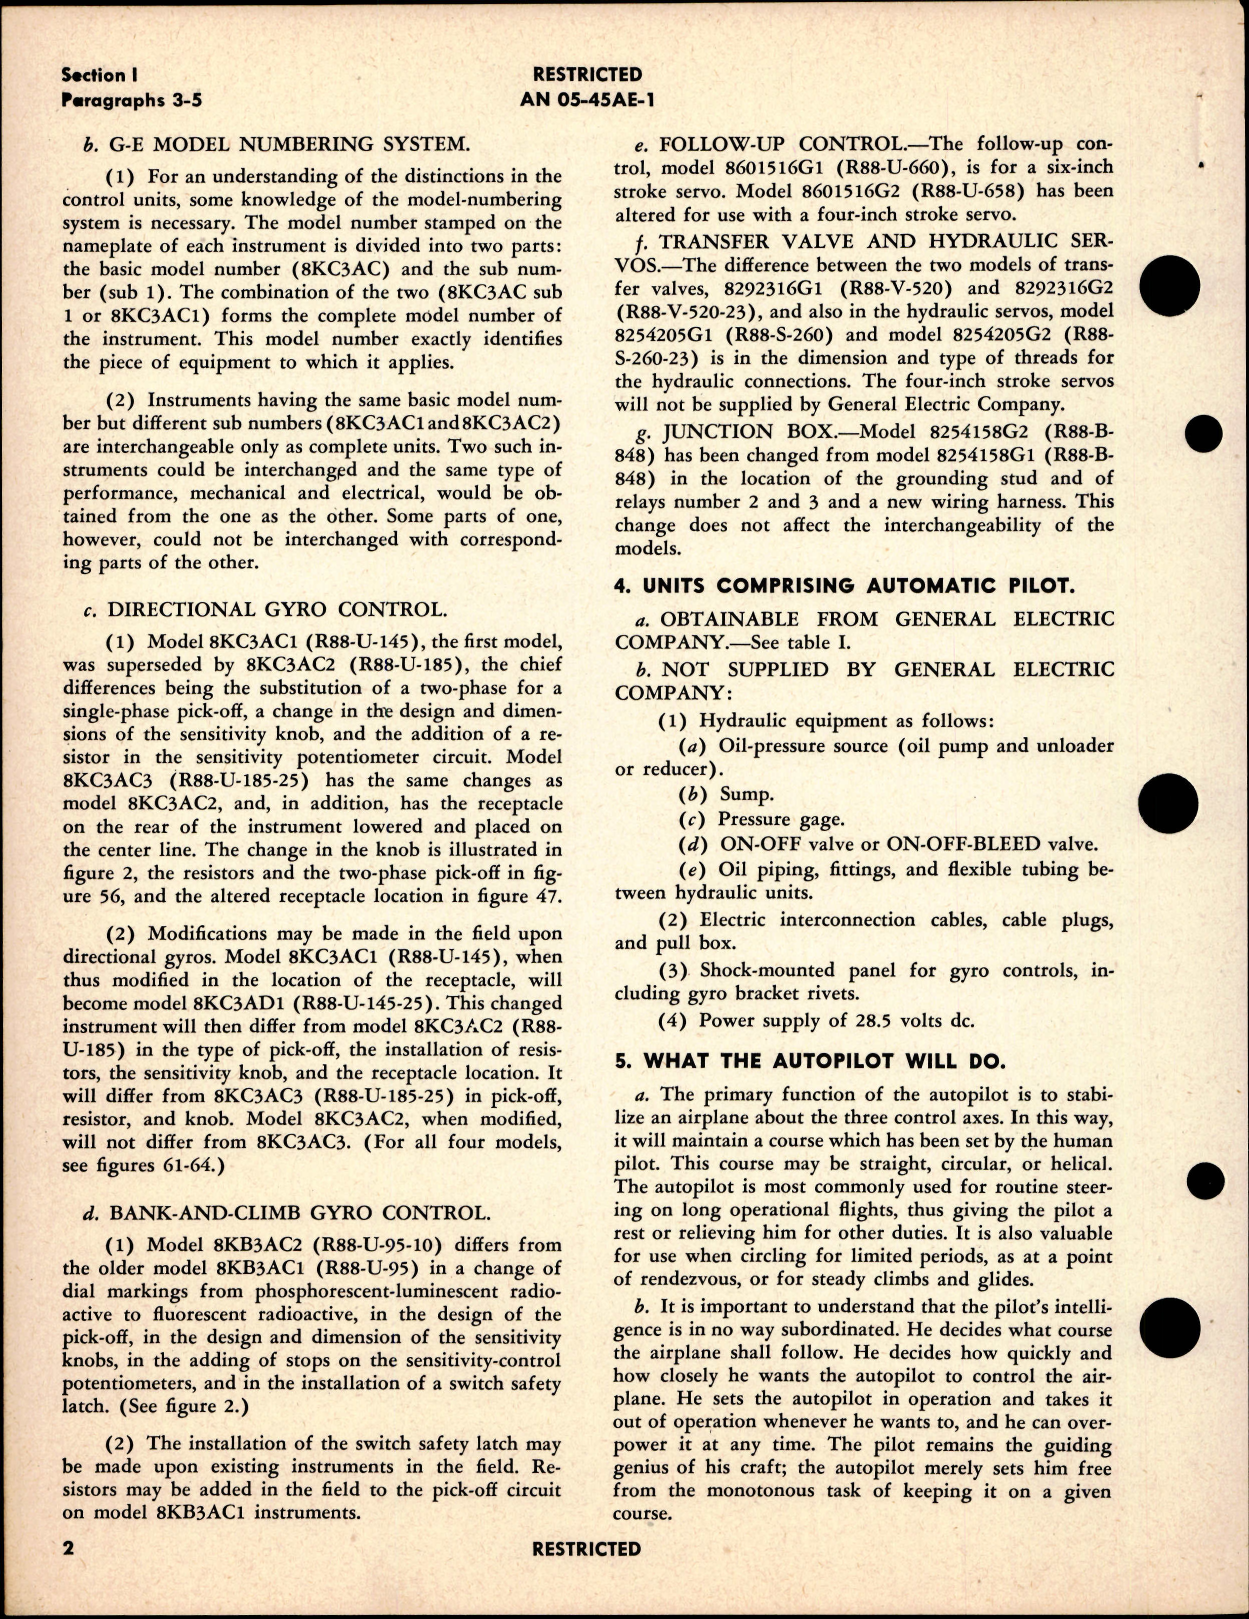 Sample page 6 from AirCorps Library document: Operation and Service Instructions for Automatic Pilot Type G-1, G.E. Model 2CJ1A1